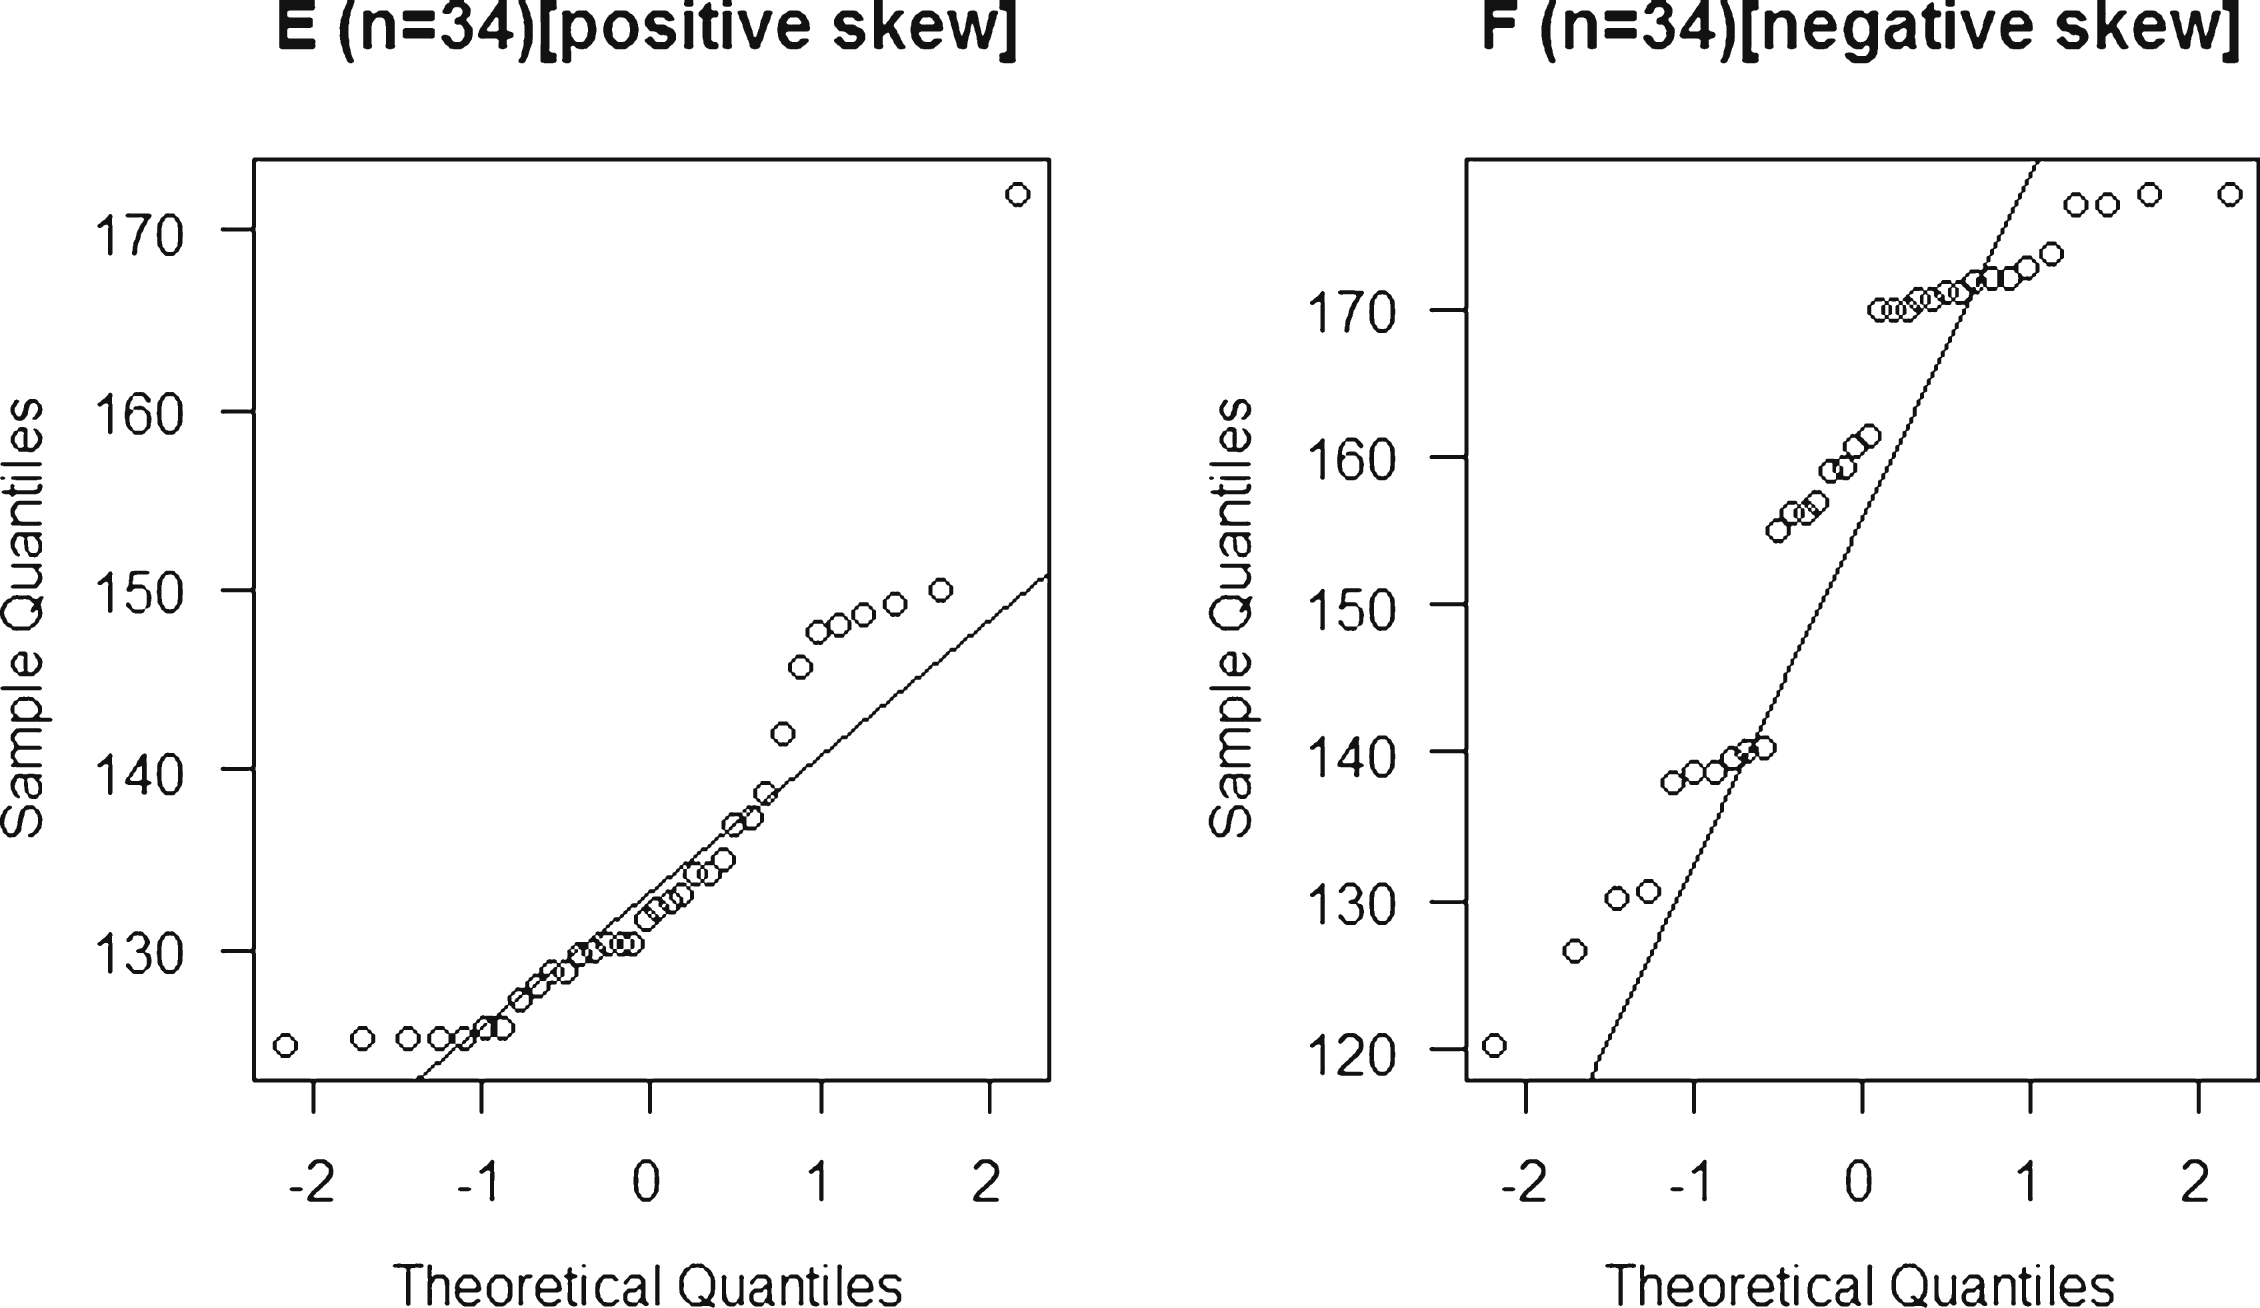 Normal probability plots of a positive(E) and a negative(F) skewed distribution.